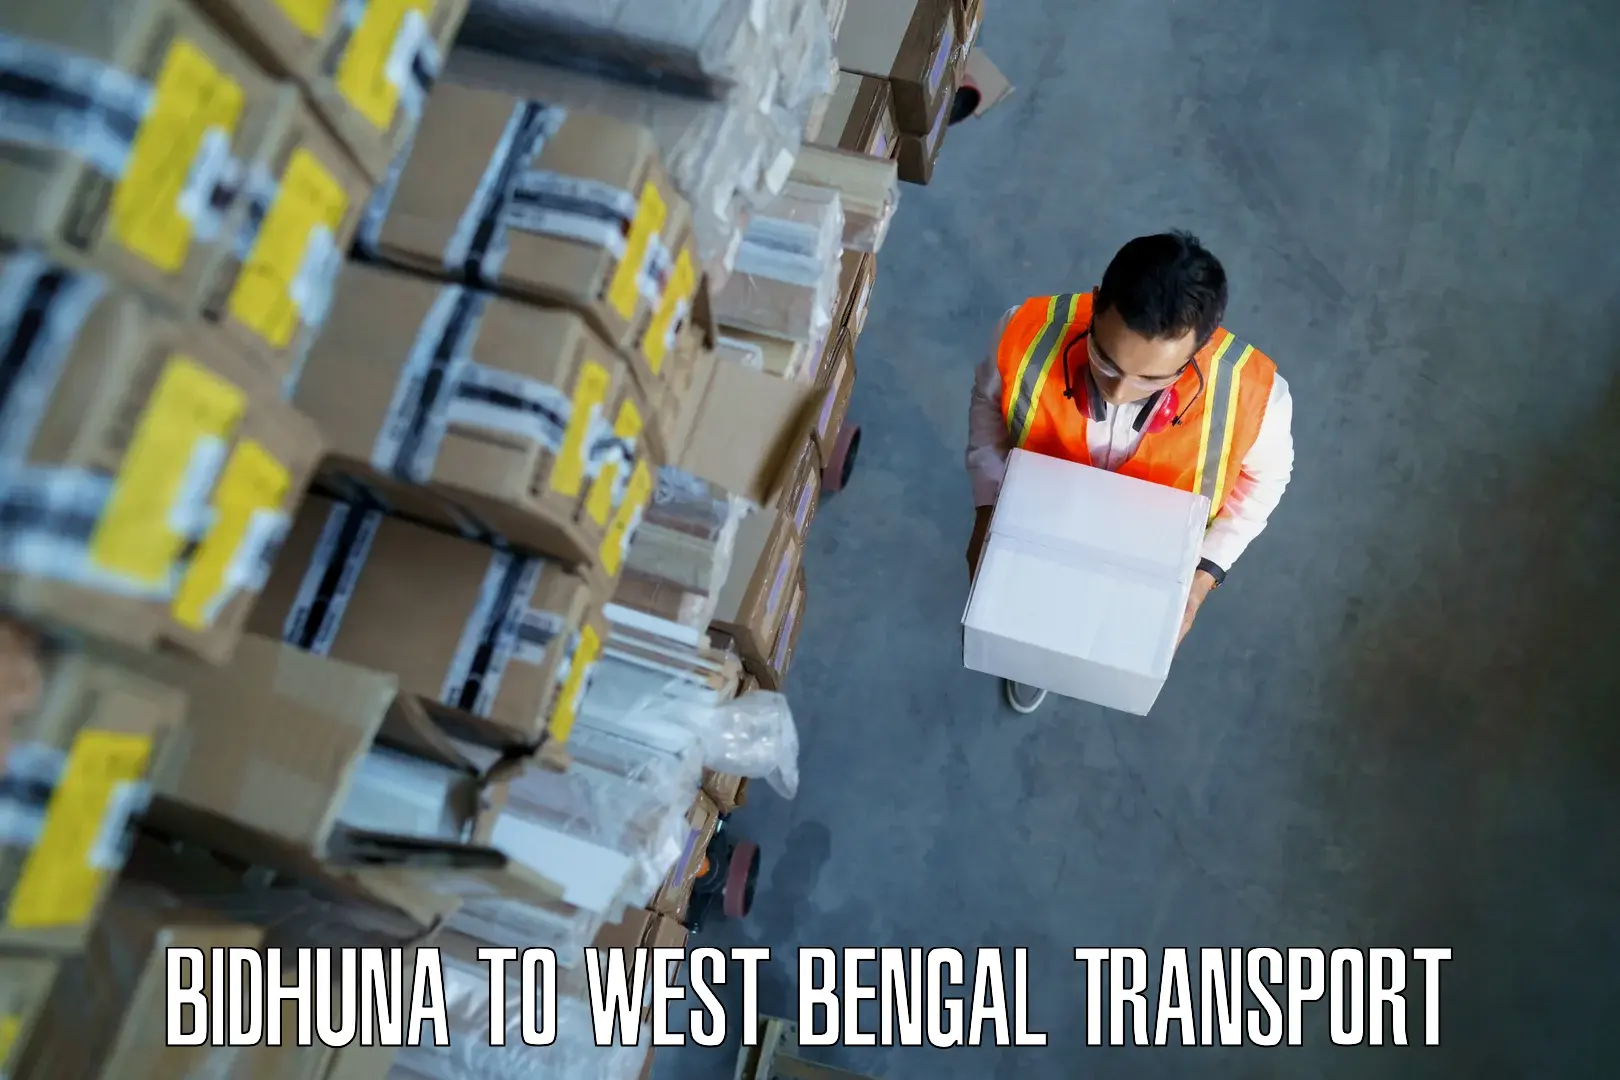 Nearby transport service Bidhuna to West Bengal